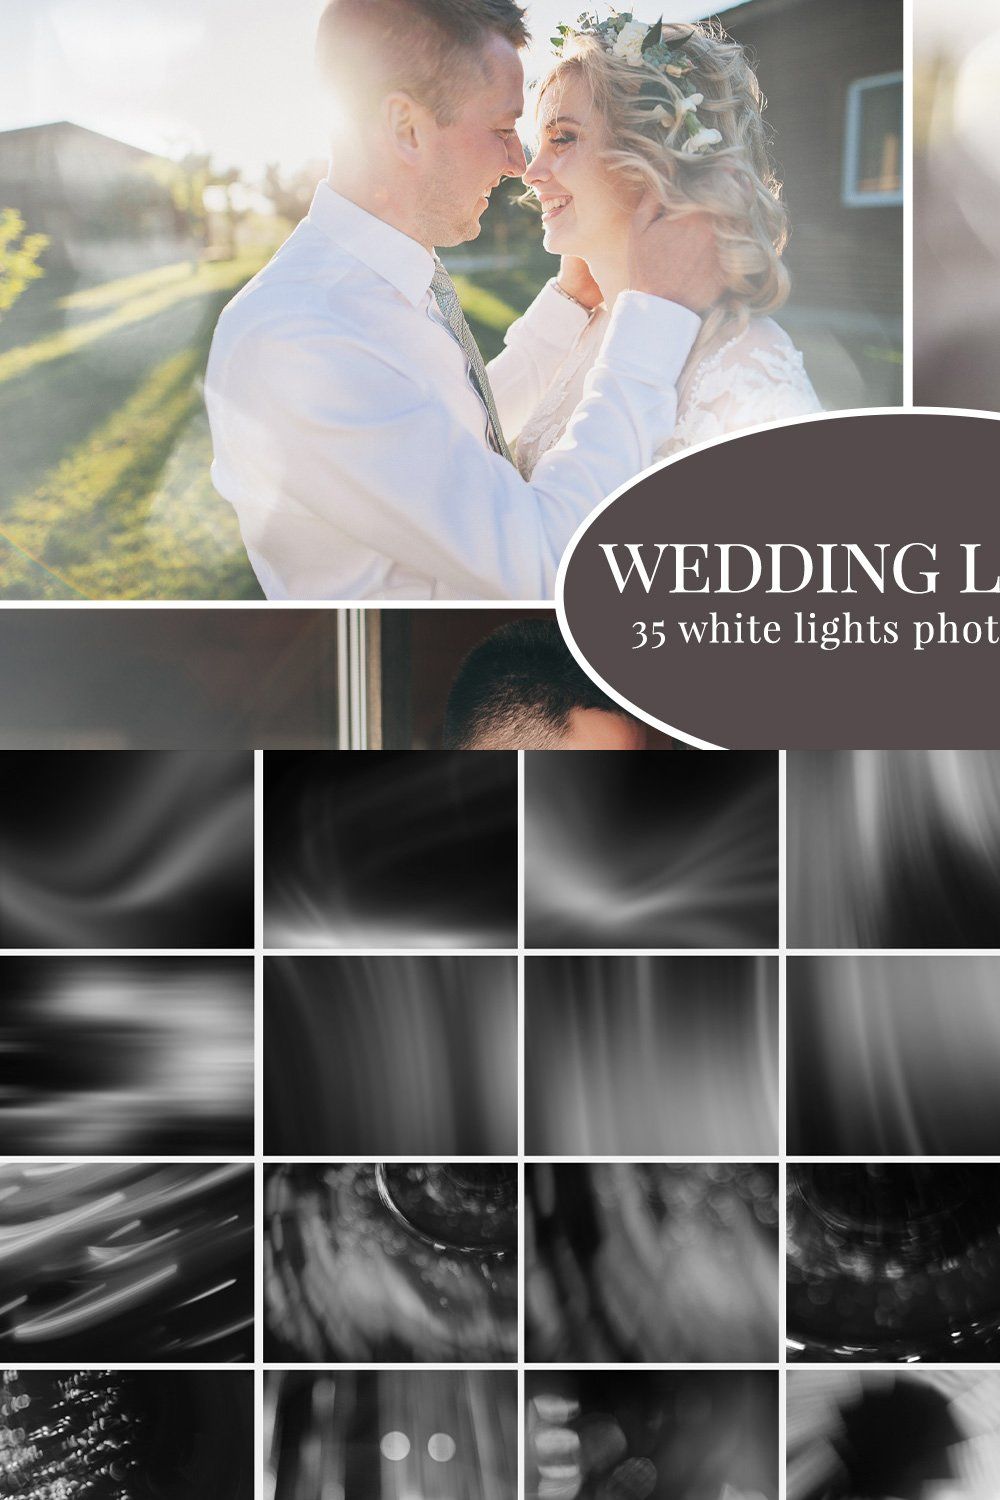 Wedding Lights photo overlays pinterest preview image.